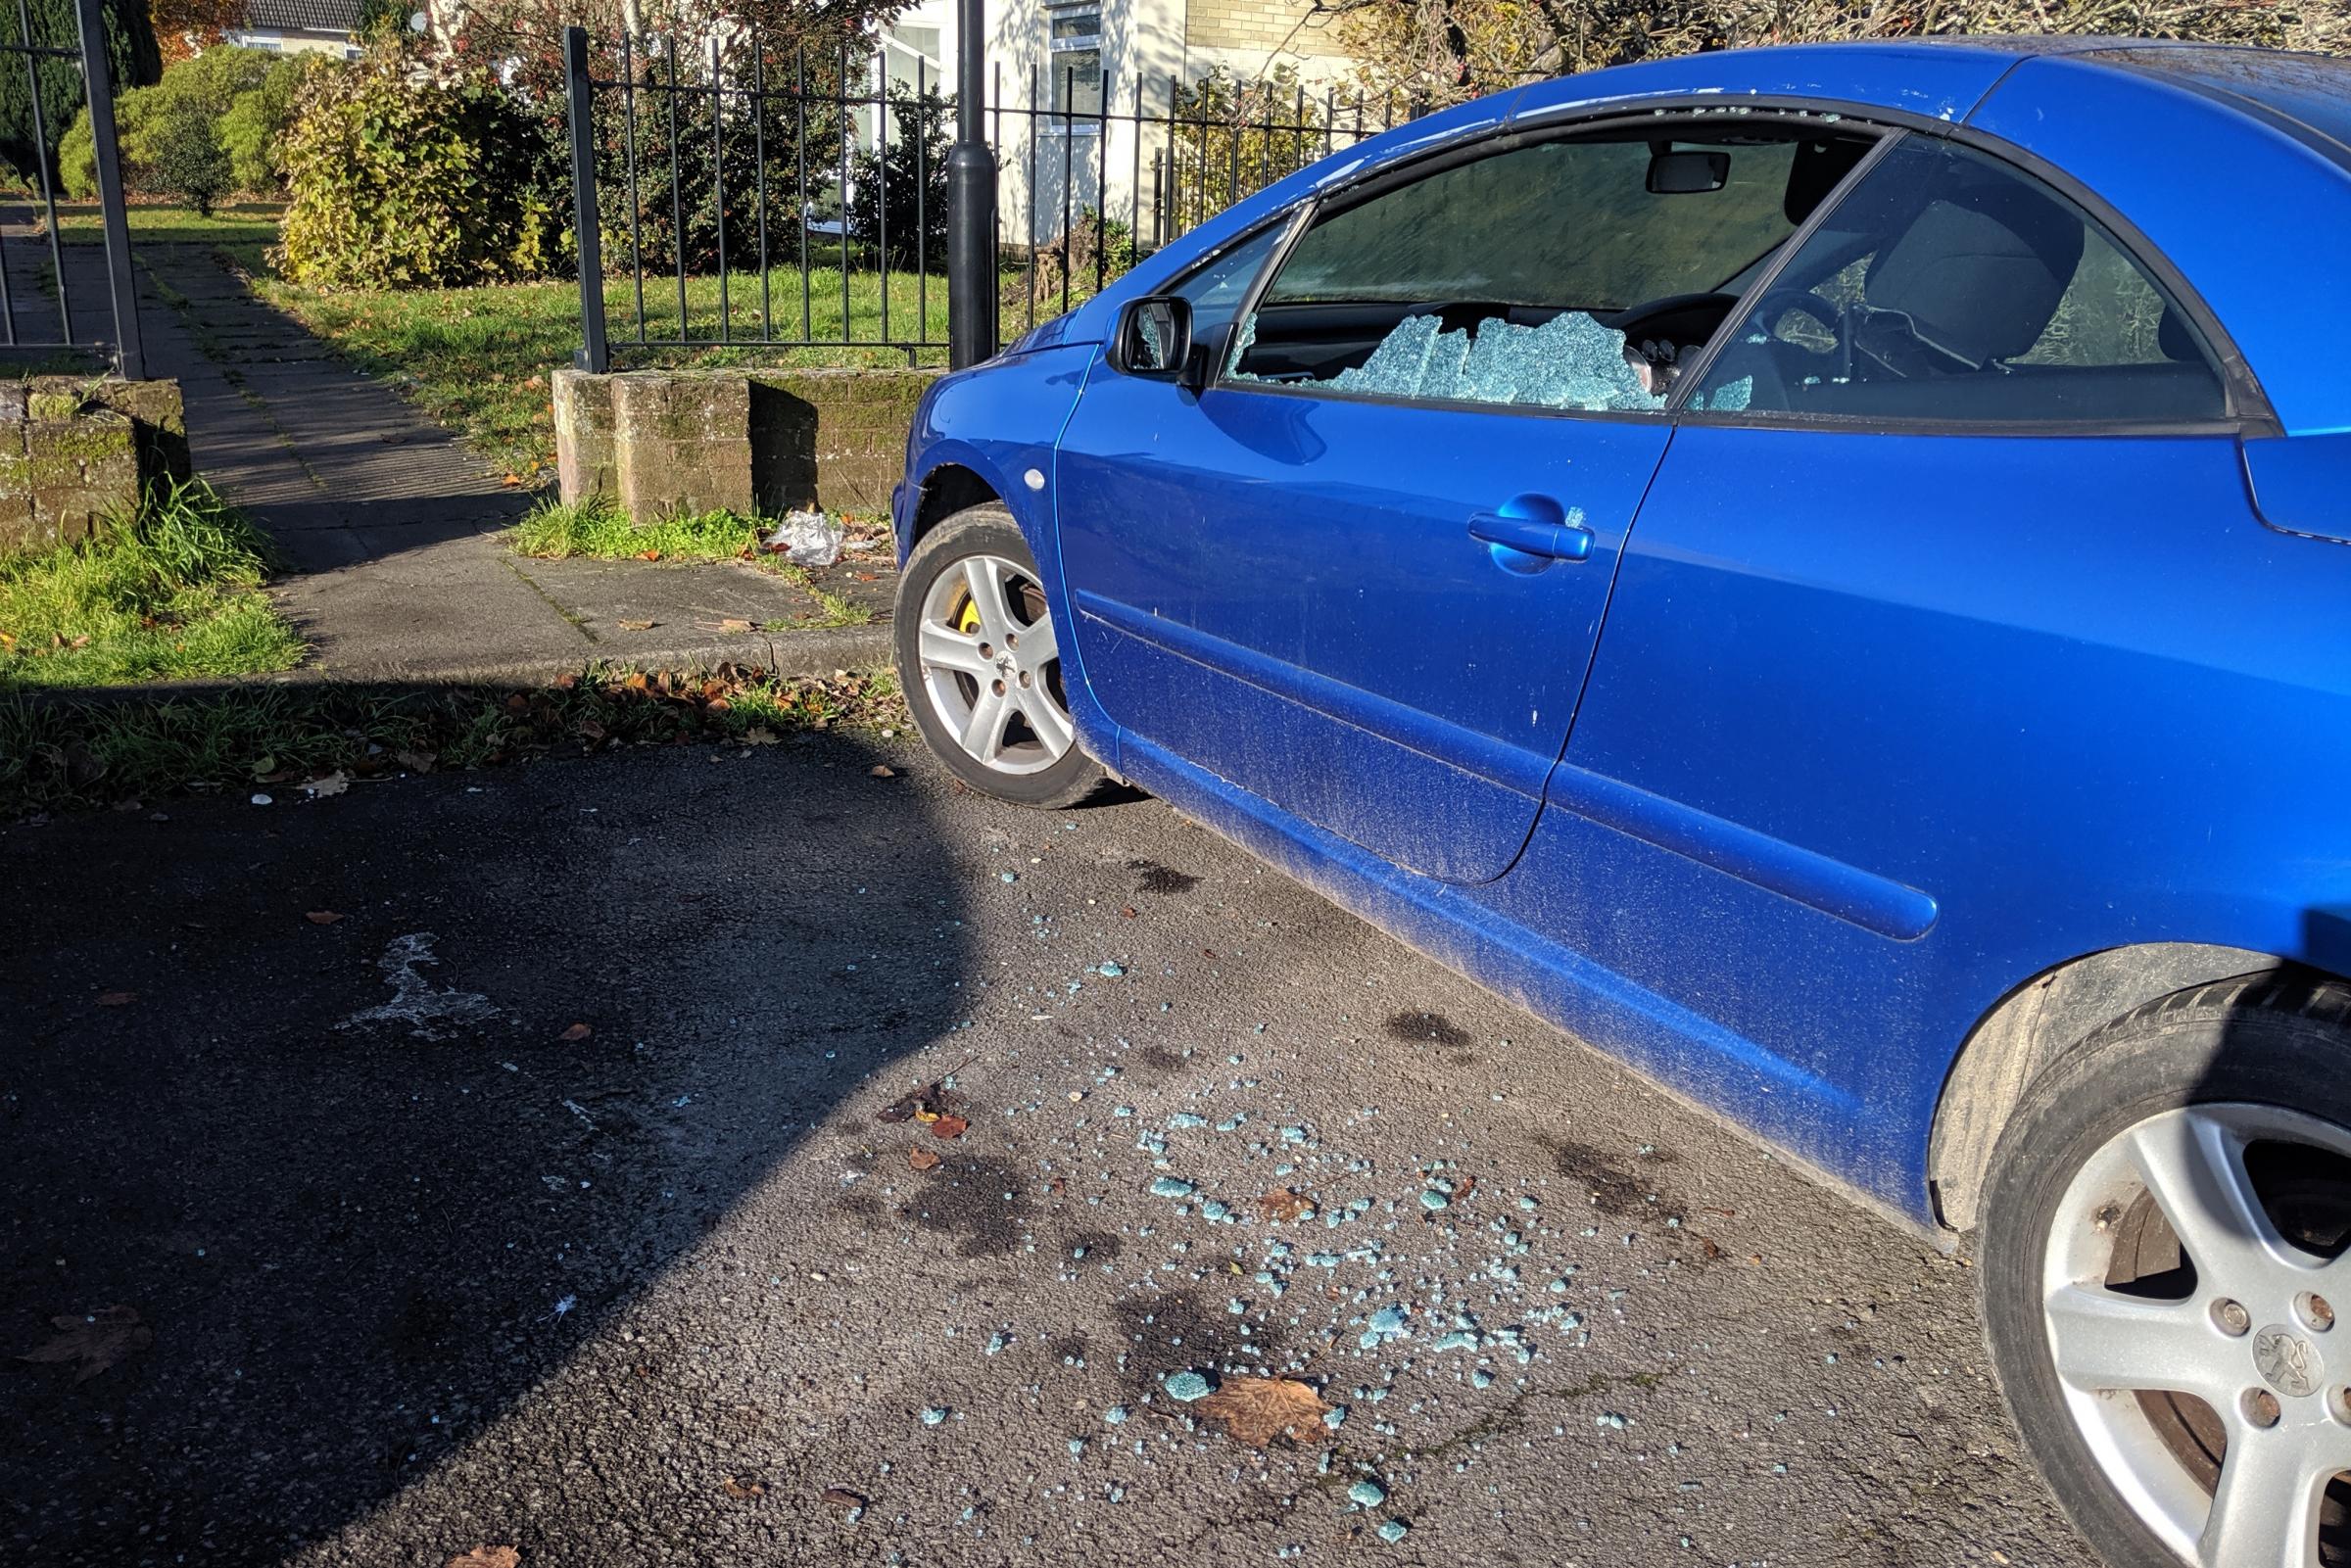 Vandals damaged at least 10 vehicles in the Millbrook and Redbridge area on Saturday night